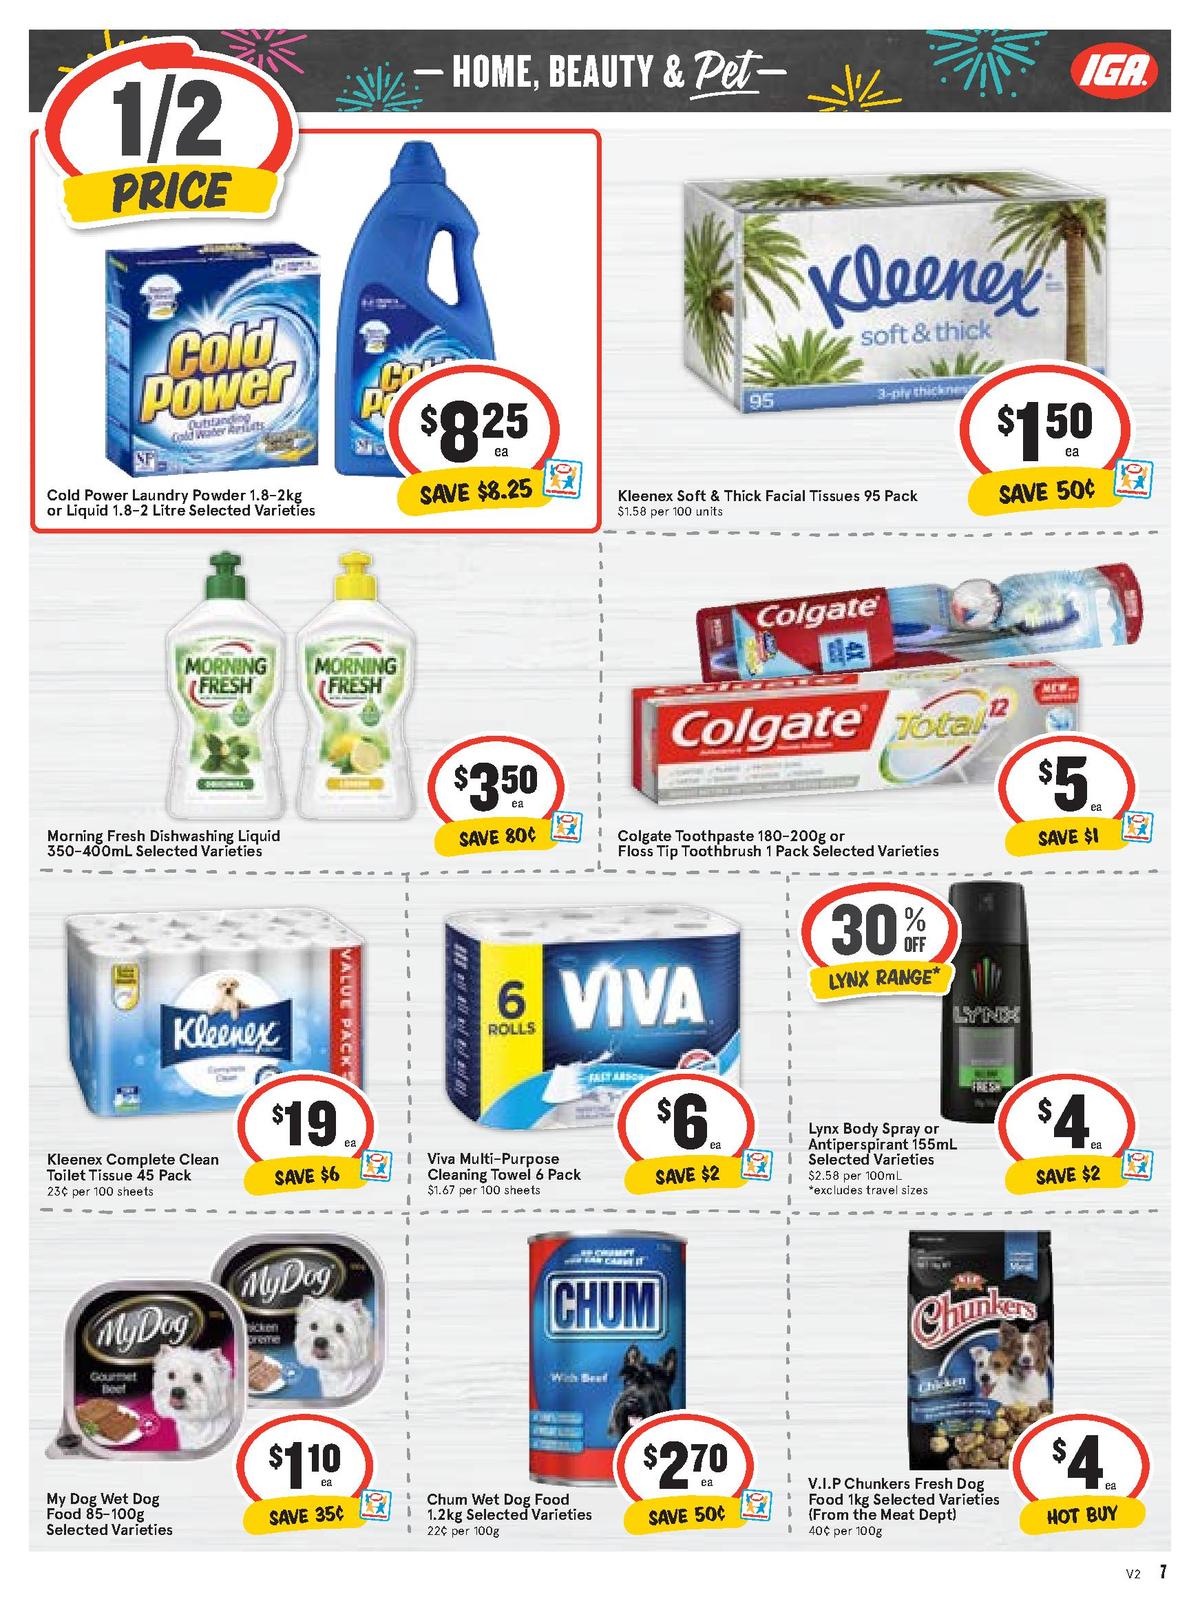 IGA Catalogues from 25 December